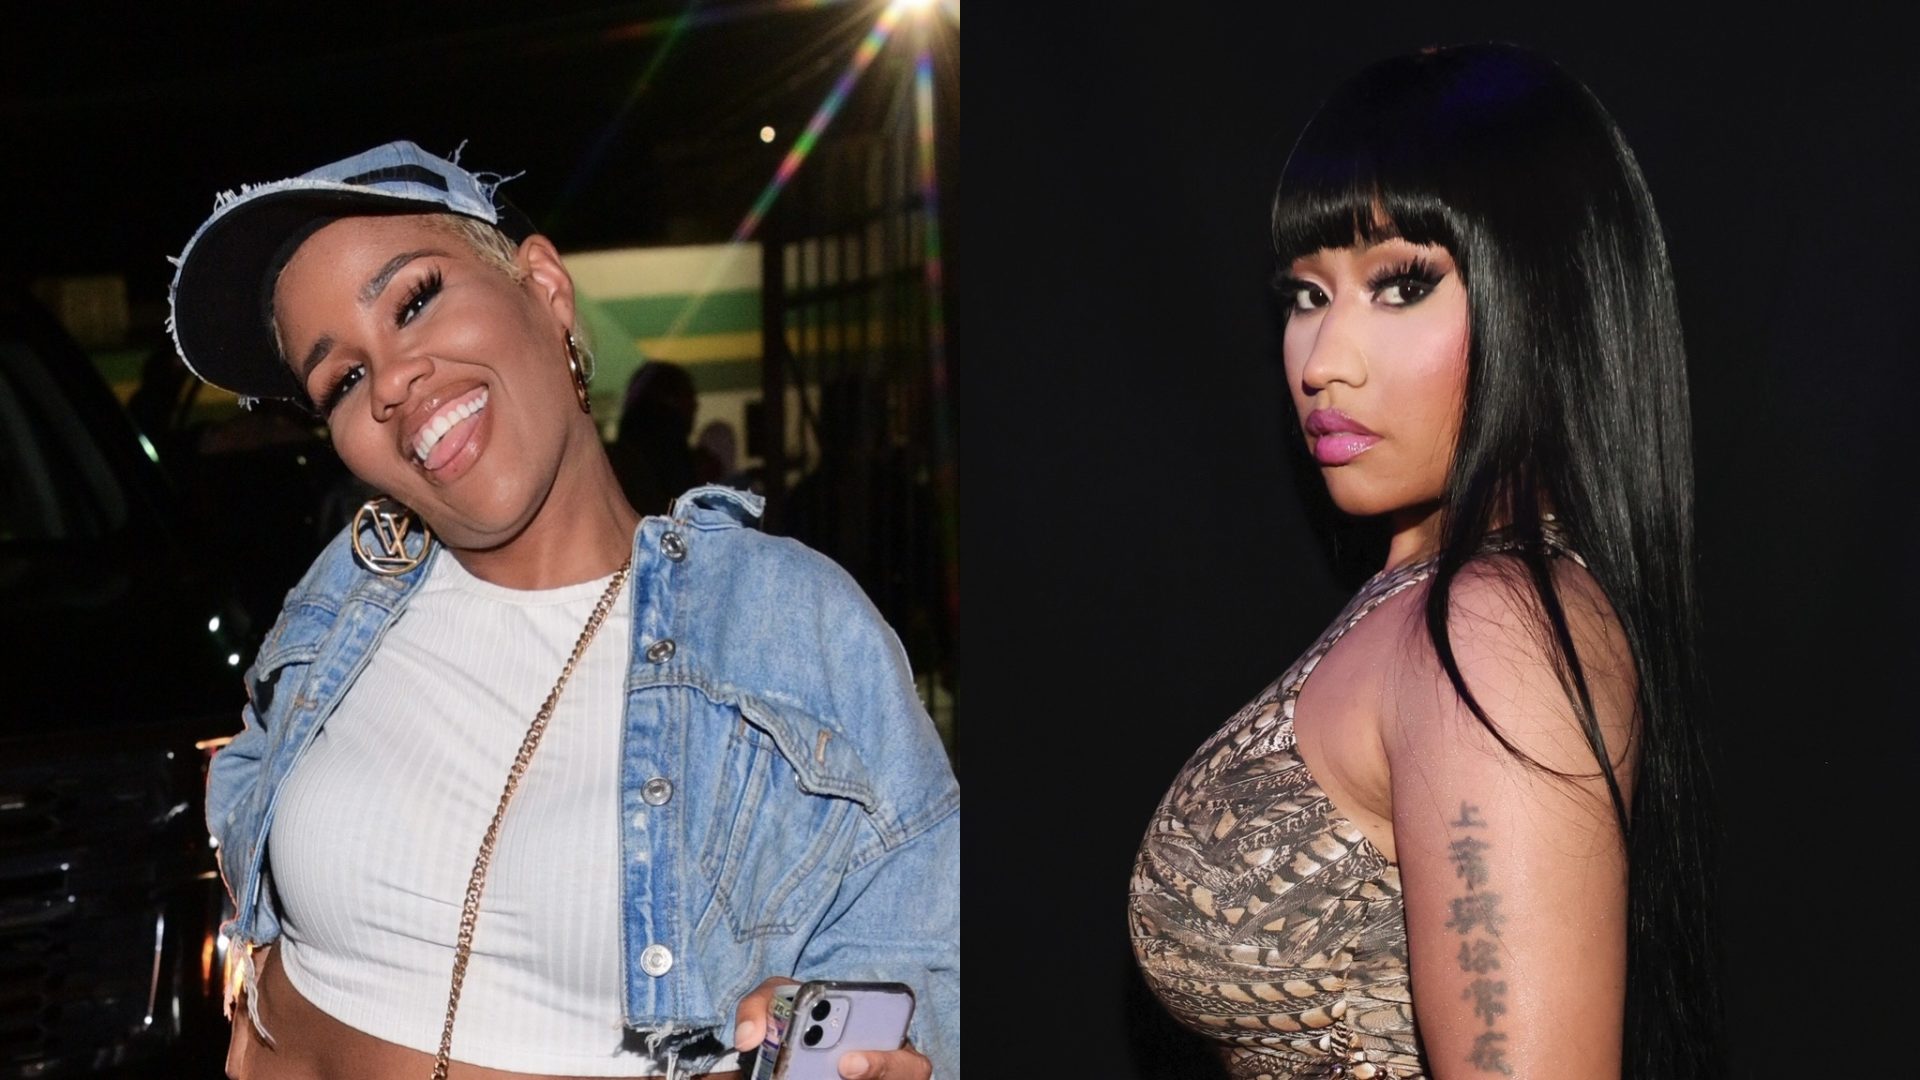 Akbar V Responds To Criticism Of Her Decision To Pay Homage To Nicki Minaj In New Song scaled